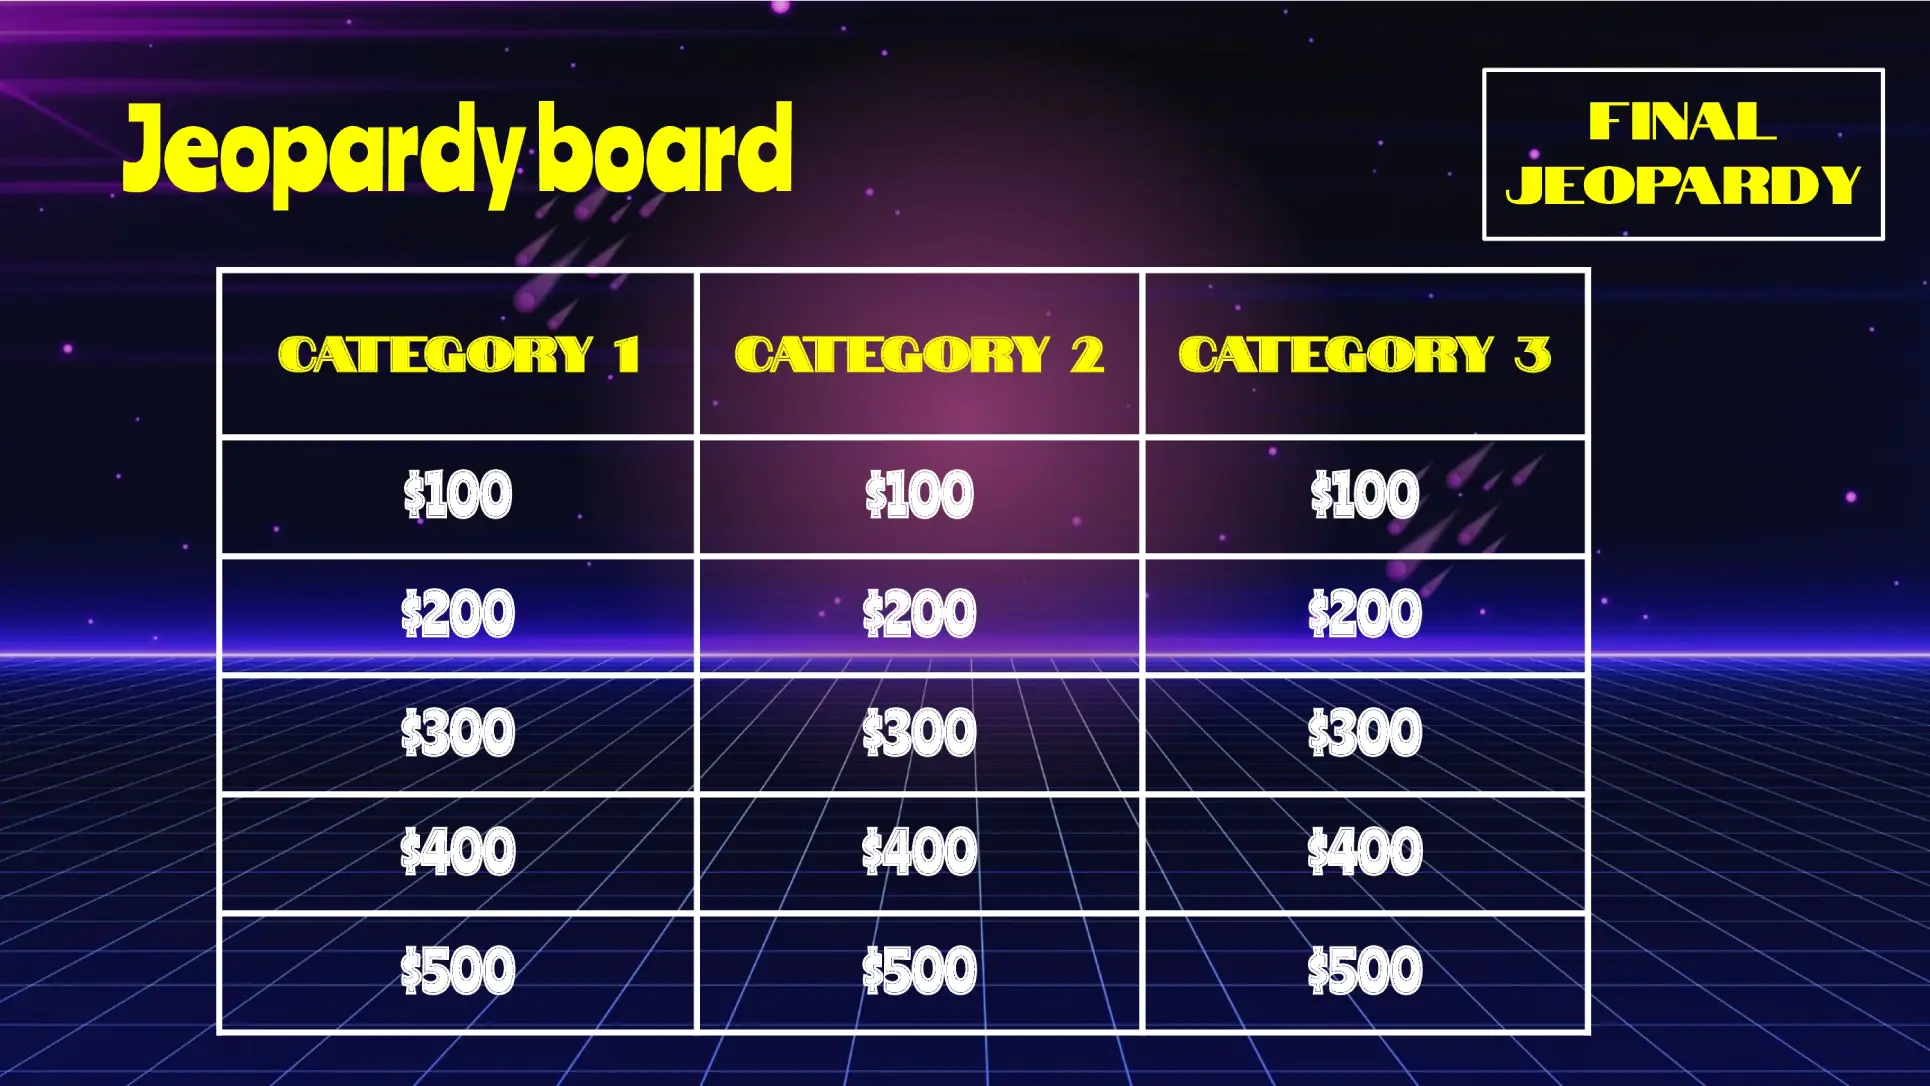 Jeopardy 3 Categories Templates for Google slides